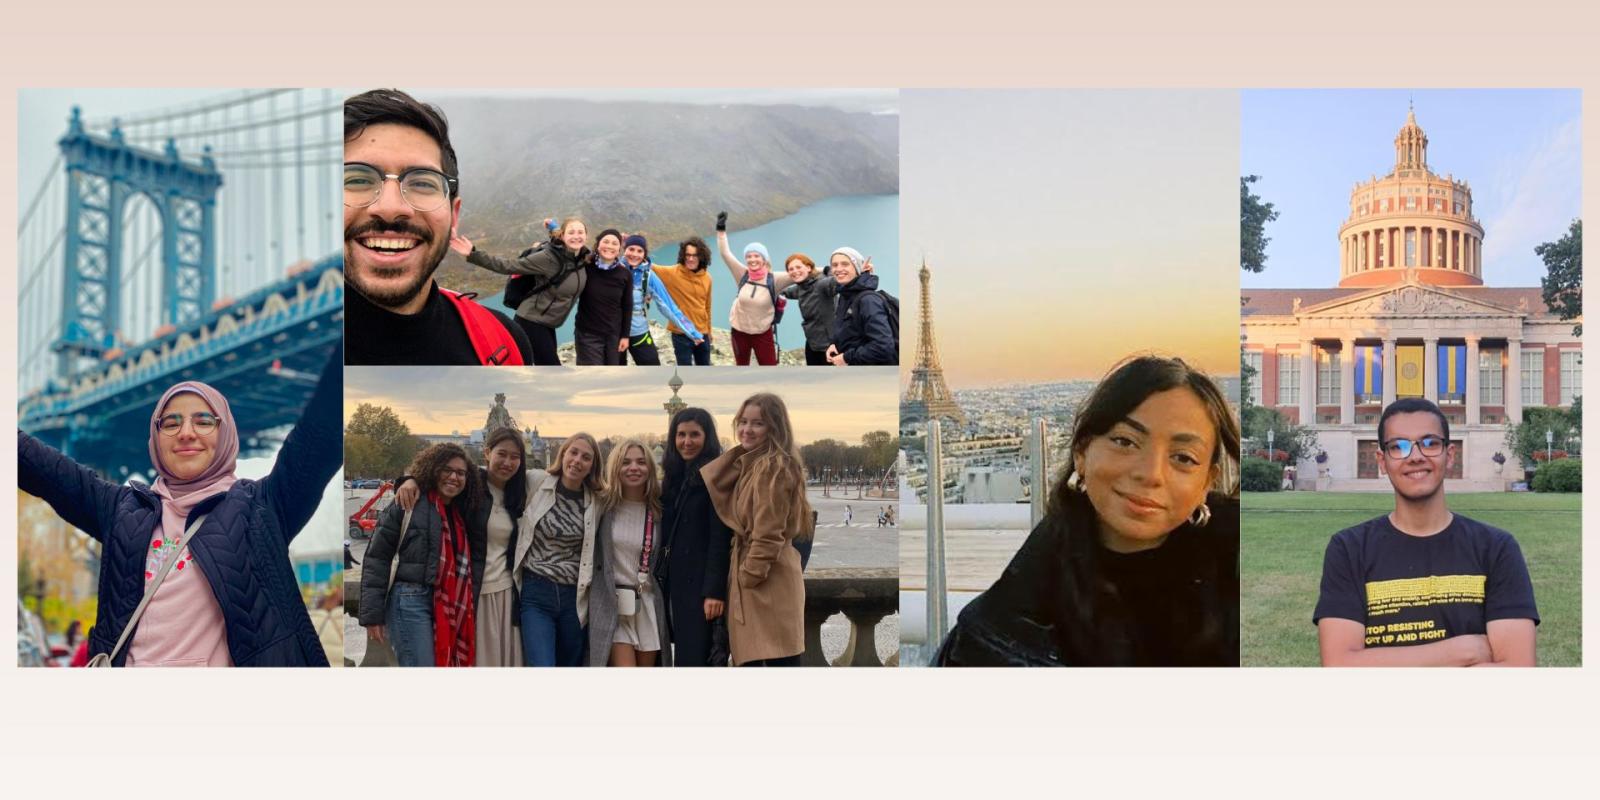 A collage of photos featuring AUC students studying abroad. On the left, a young woman poses in front of the Eiffel tower. In the center top, a young man take a selfie with his friends on a cliff in Norway. On the bottom center, a young woman poses with her friends in France. On the right, a young woman poses with her hands lifted in front of a bridge in the U.S.